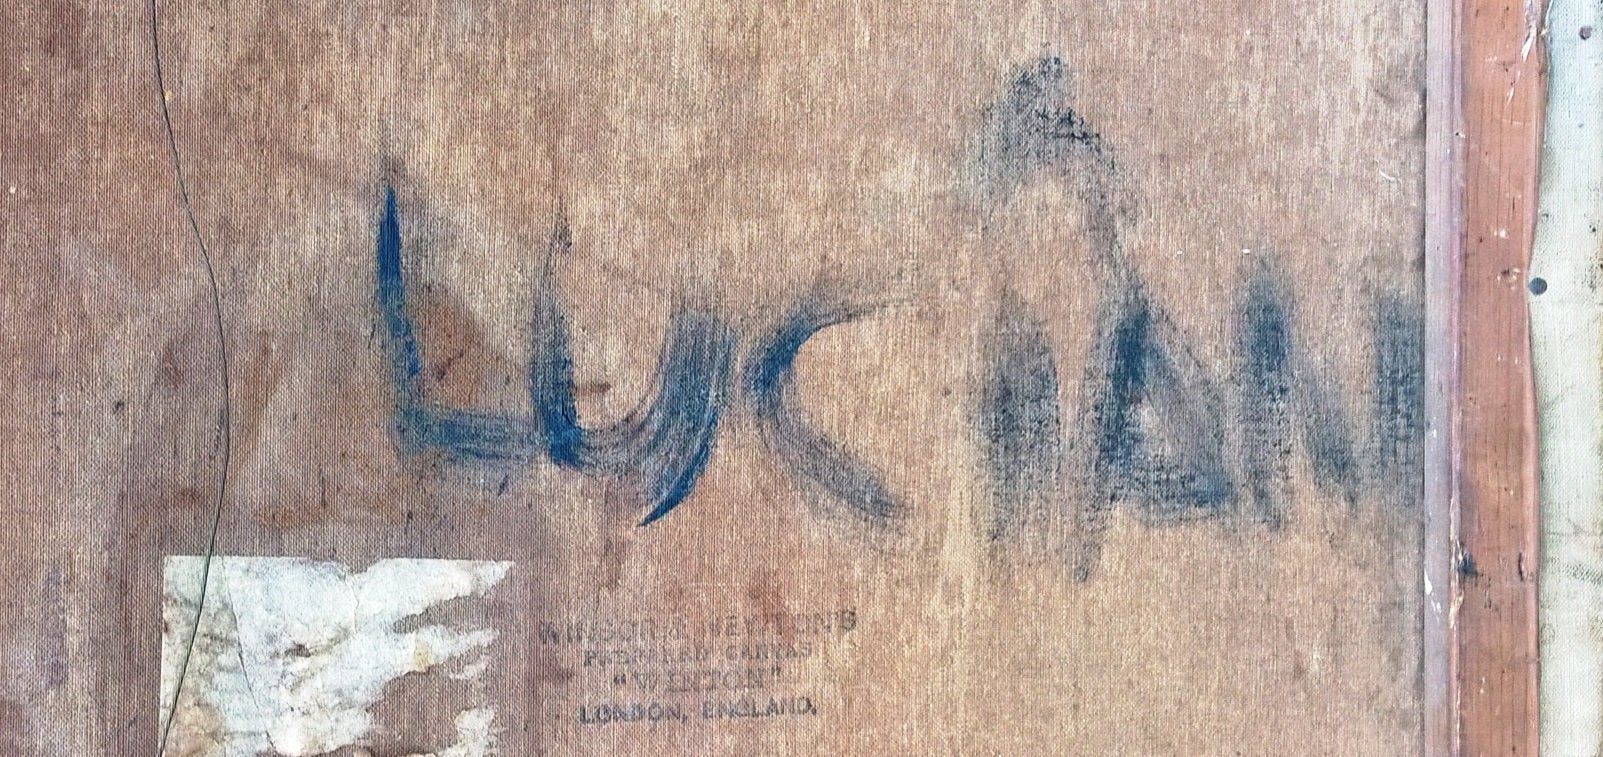 ‘Lucian’ was scrawled on the back of the canvas